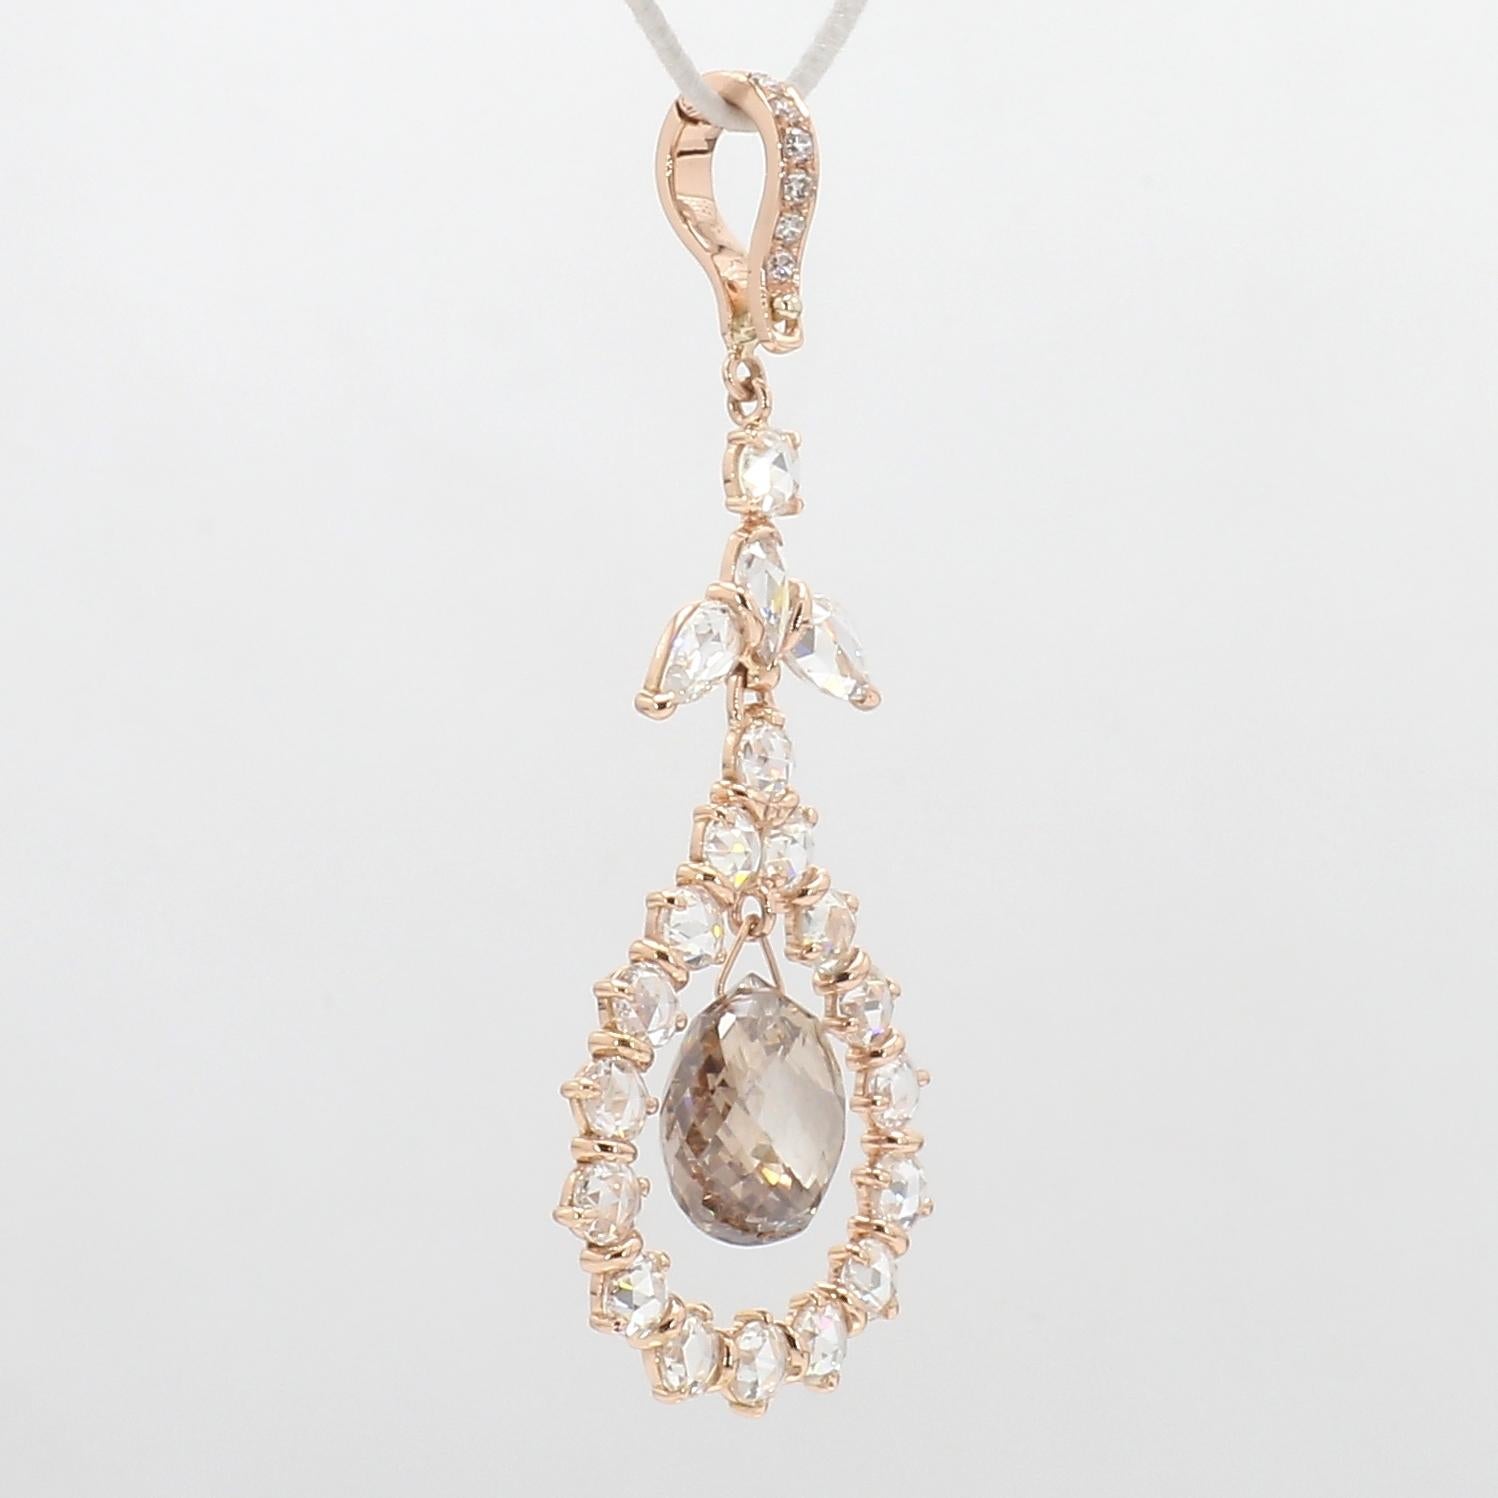 Beautiful diamond pendant featuring diamond briolette of 3.78 cts surrounded by diamond rosecut .This pendant is perfect for the every occasion and for everyday wear .Style up this pendant with our Panim rosecut or briolette necklaces or layer it